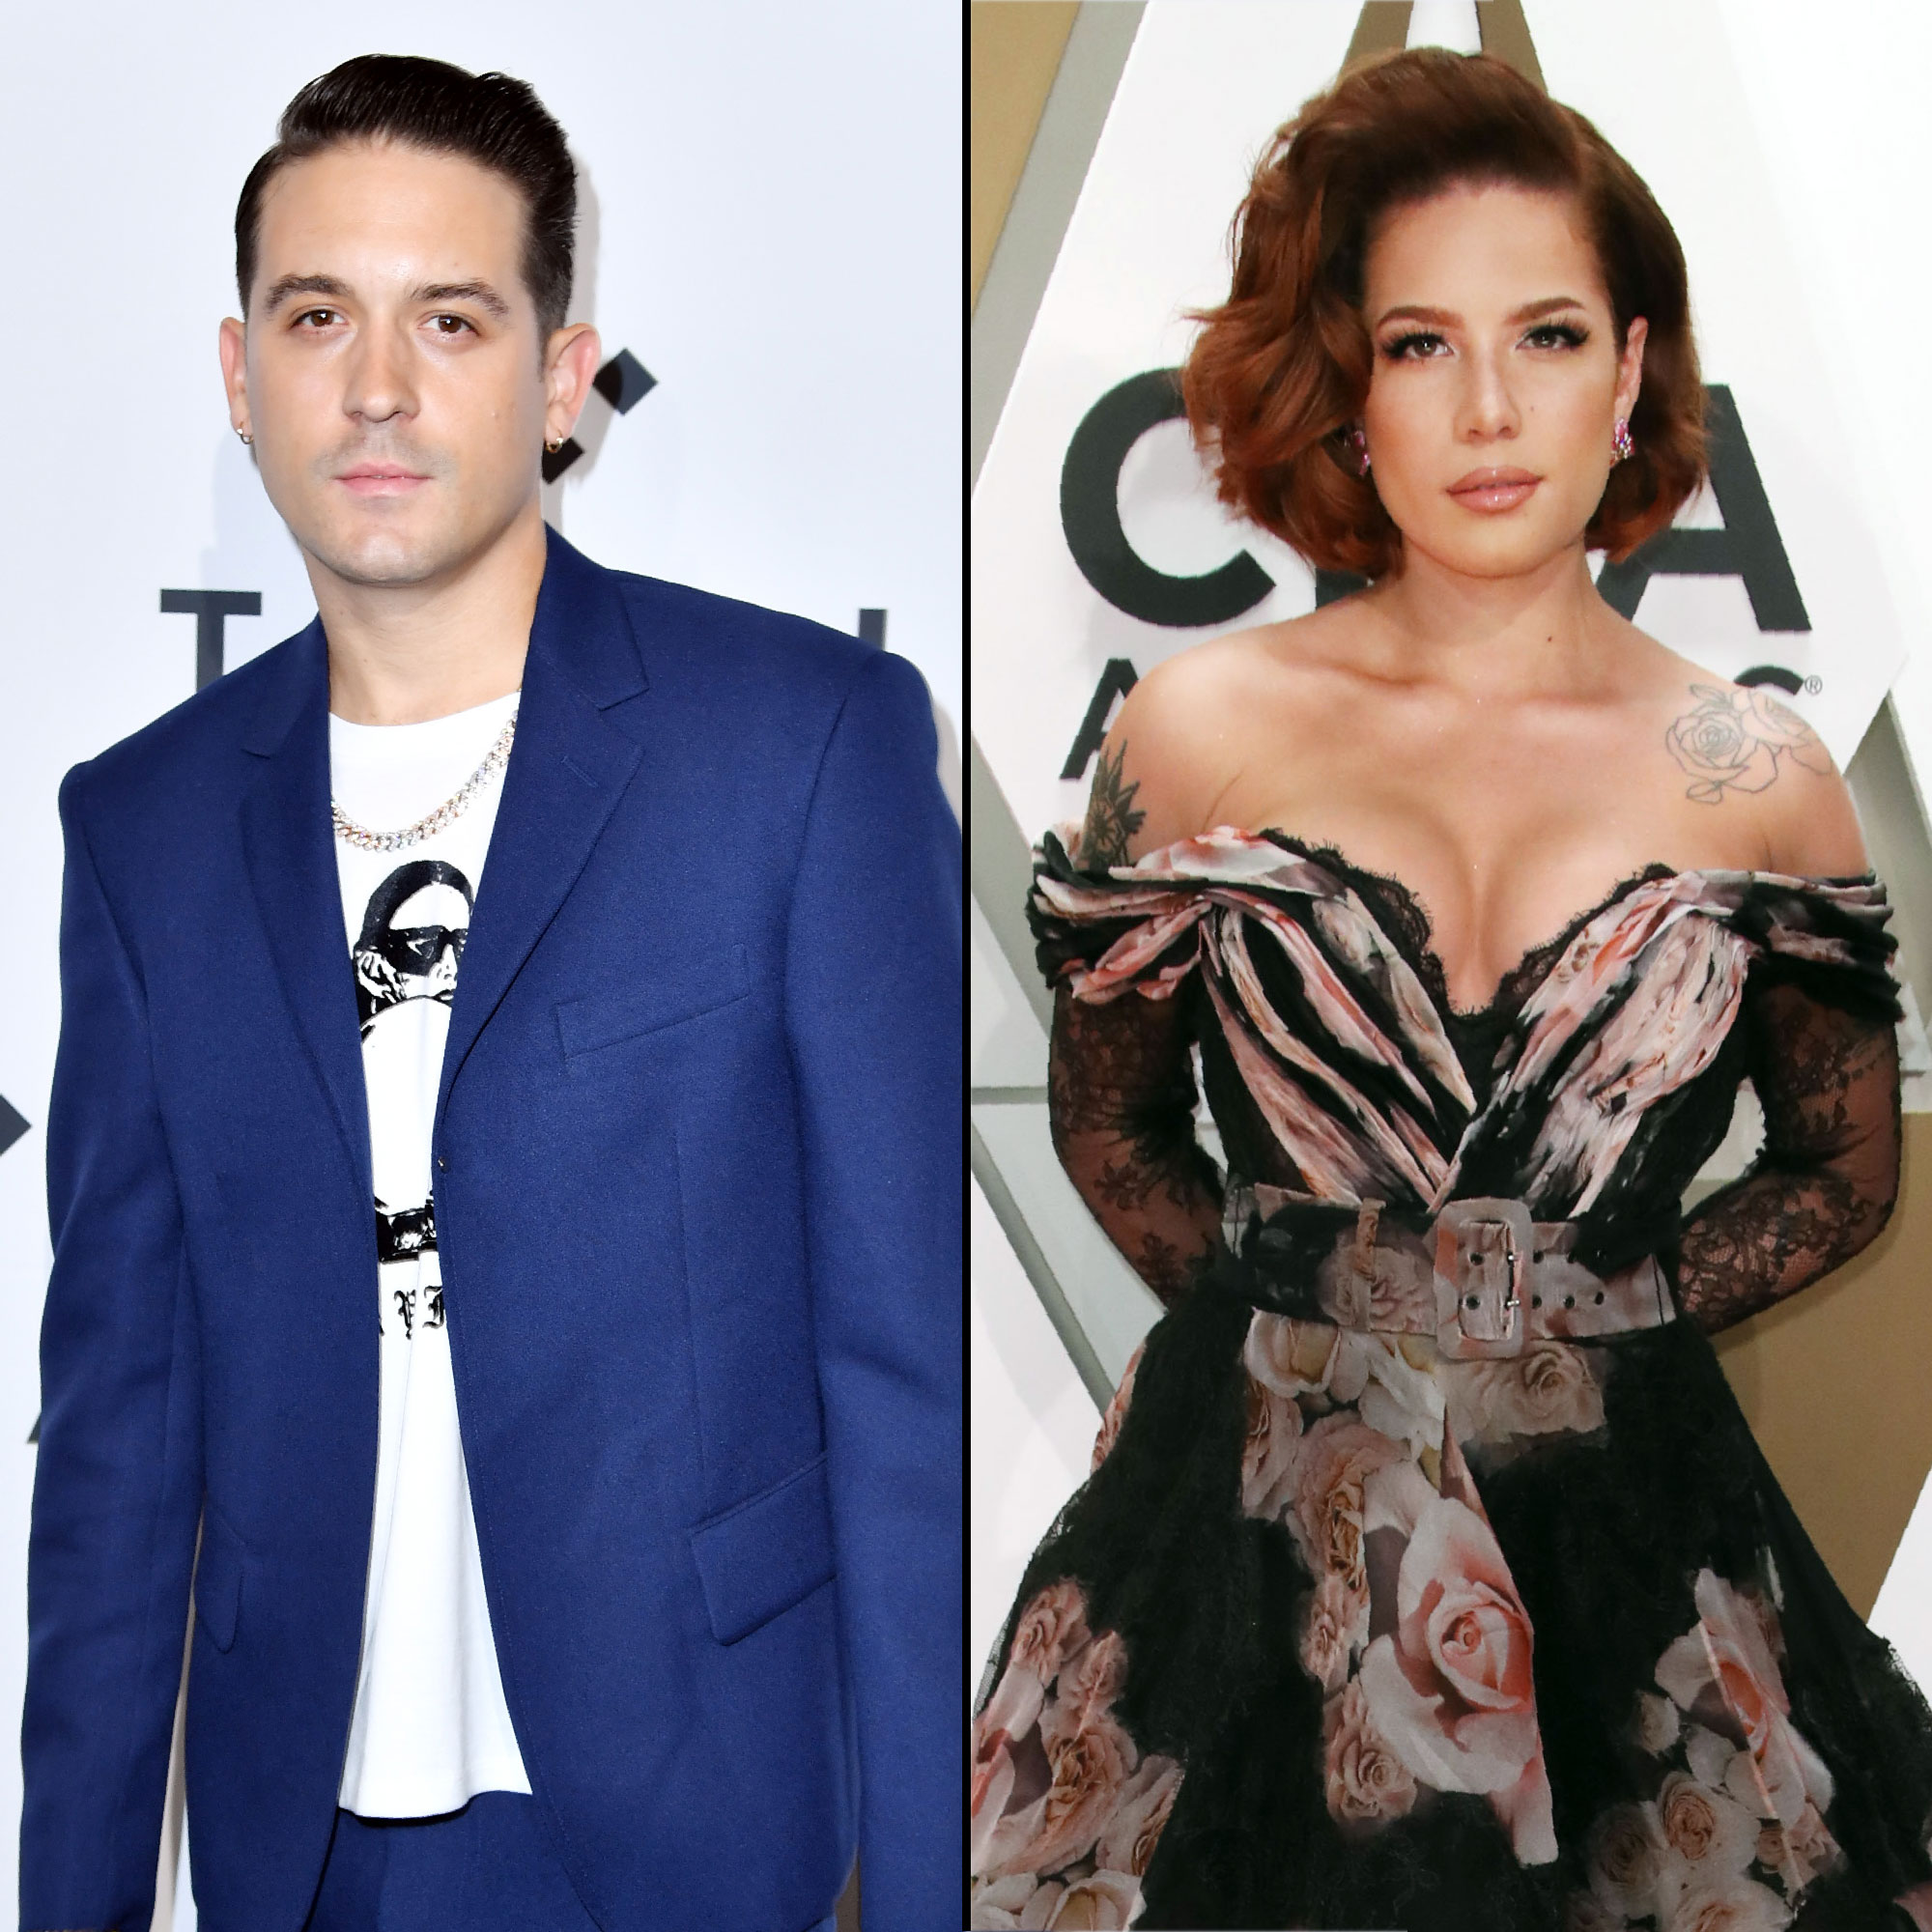 https://www.usmagazine.com/wp-content/uploads/2020/07/G-Eazy-Had-A-Creative-Breakthrough-After-Toxic-Halsey-Relationship-.jpg?quality=78&strip=all